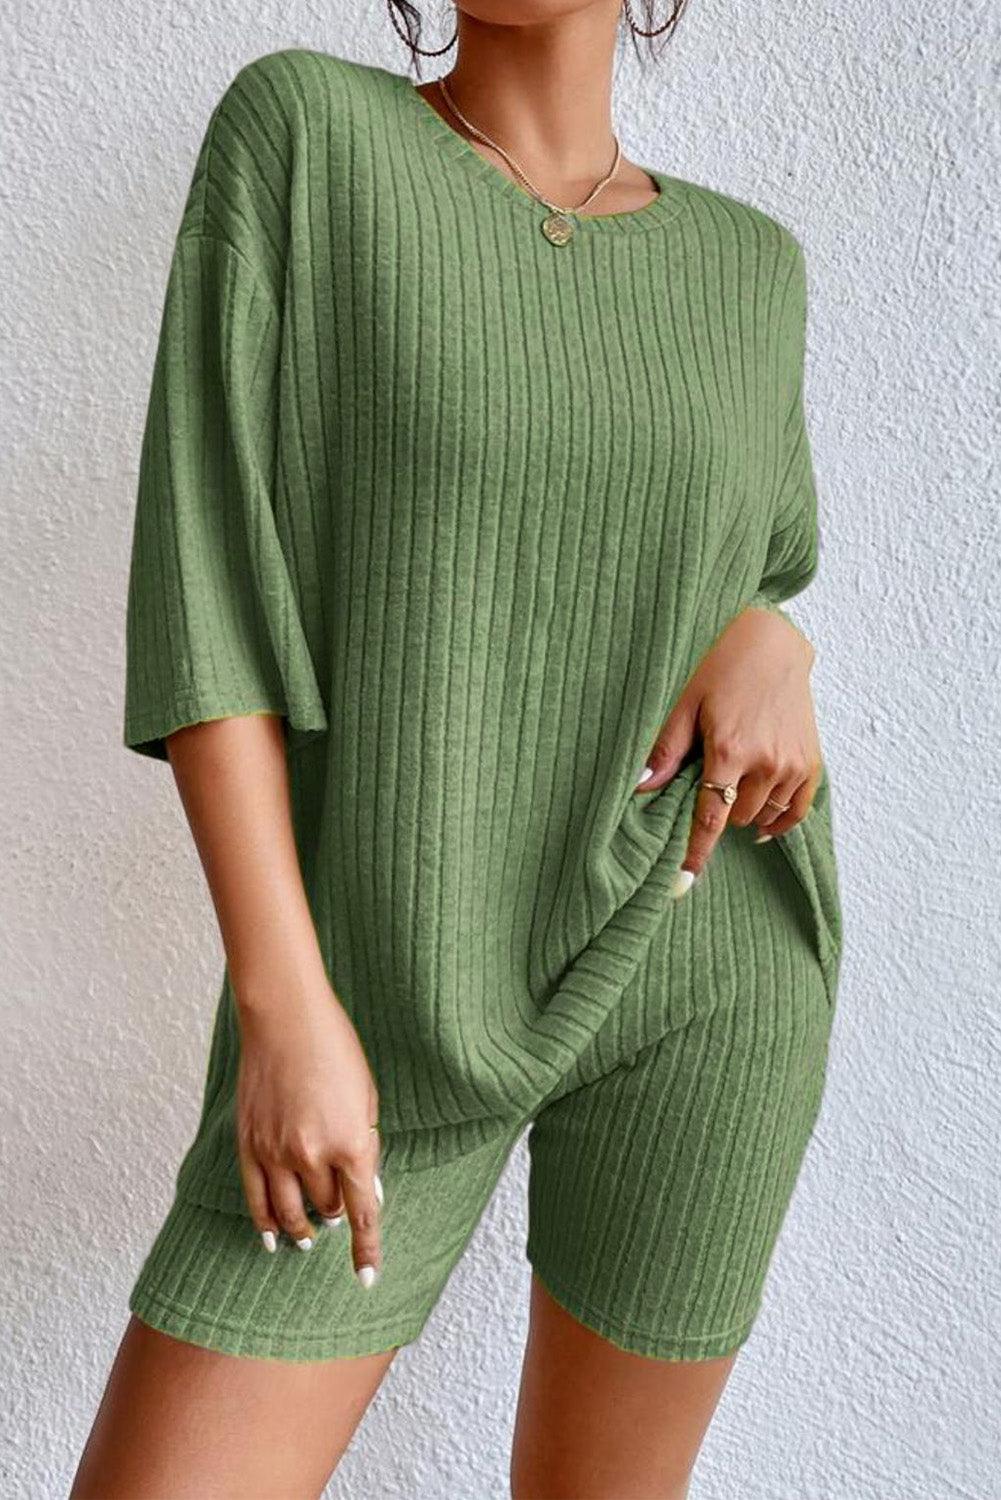 Khaki Ribbed Knit V Neck Slouchy Two-piece Outfit - L & M Kee, LLC